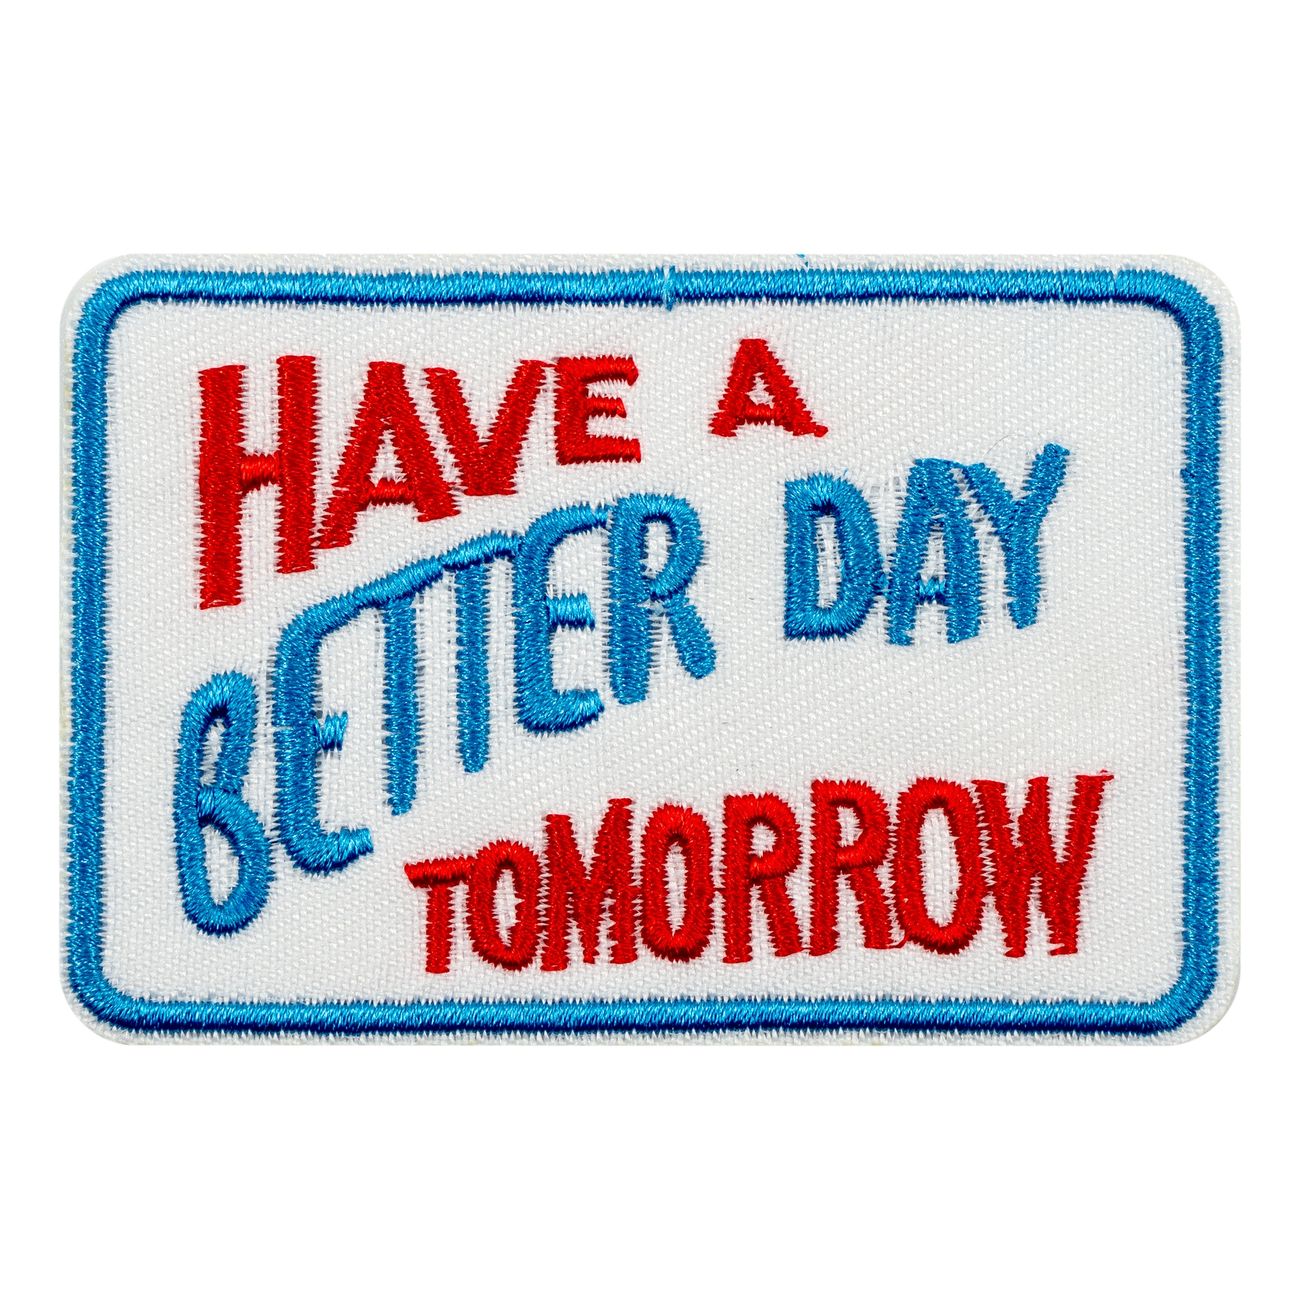 tygmarke-have-a-better-day-tomorrow-99856-1